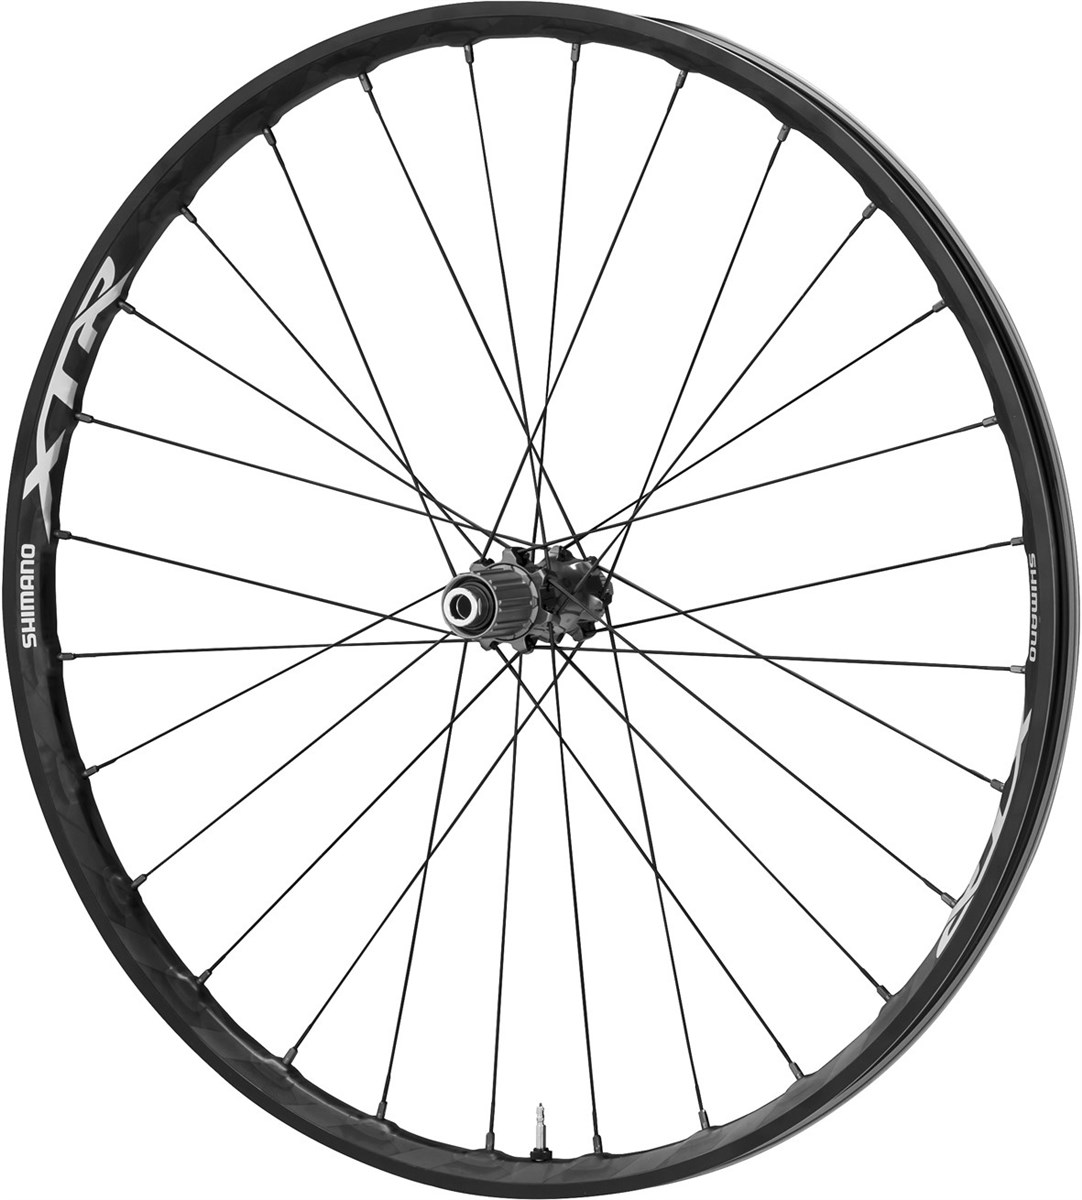 Shimano WH-M9000-TL XC Wheel - Q / R 135 mm Axle -  27.5in (650B) Carbon Clincher -  Rear product image